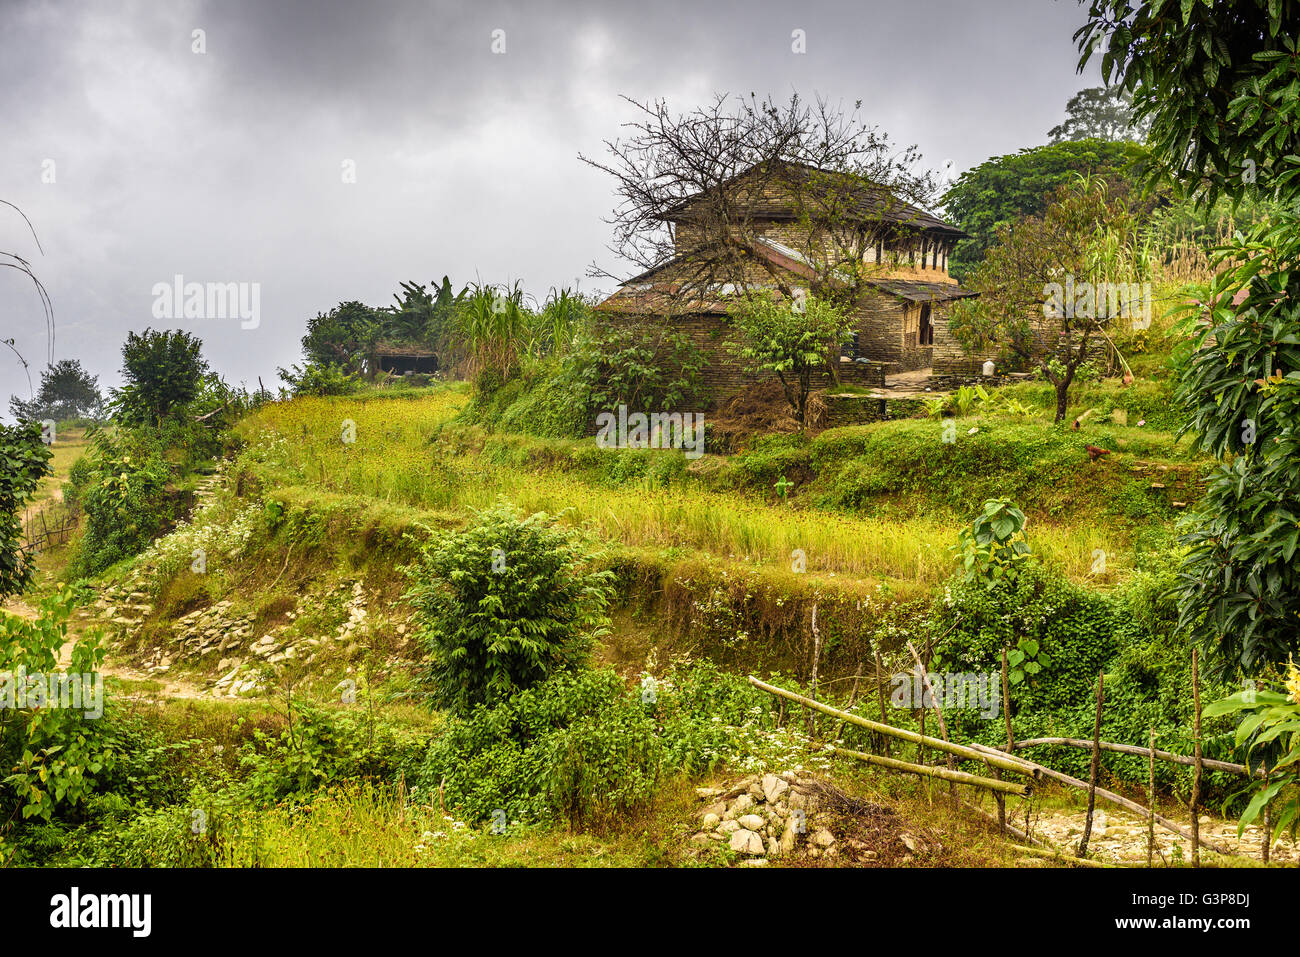 Village of Dhampus situated in the Himalayas mountains near Pokhara in Nepal Stock Photo